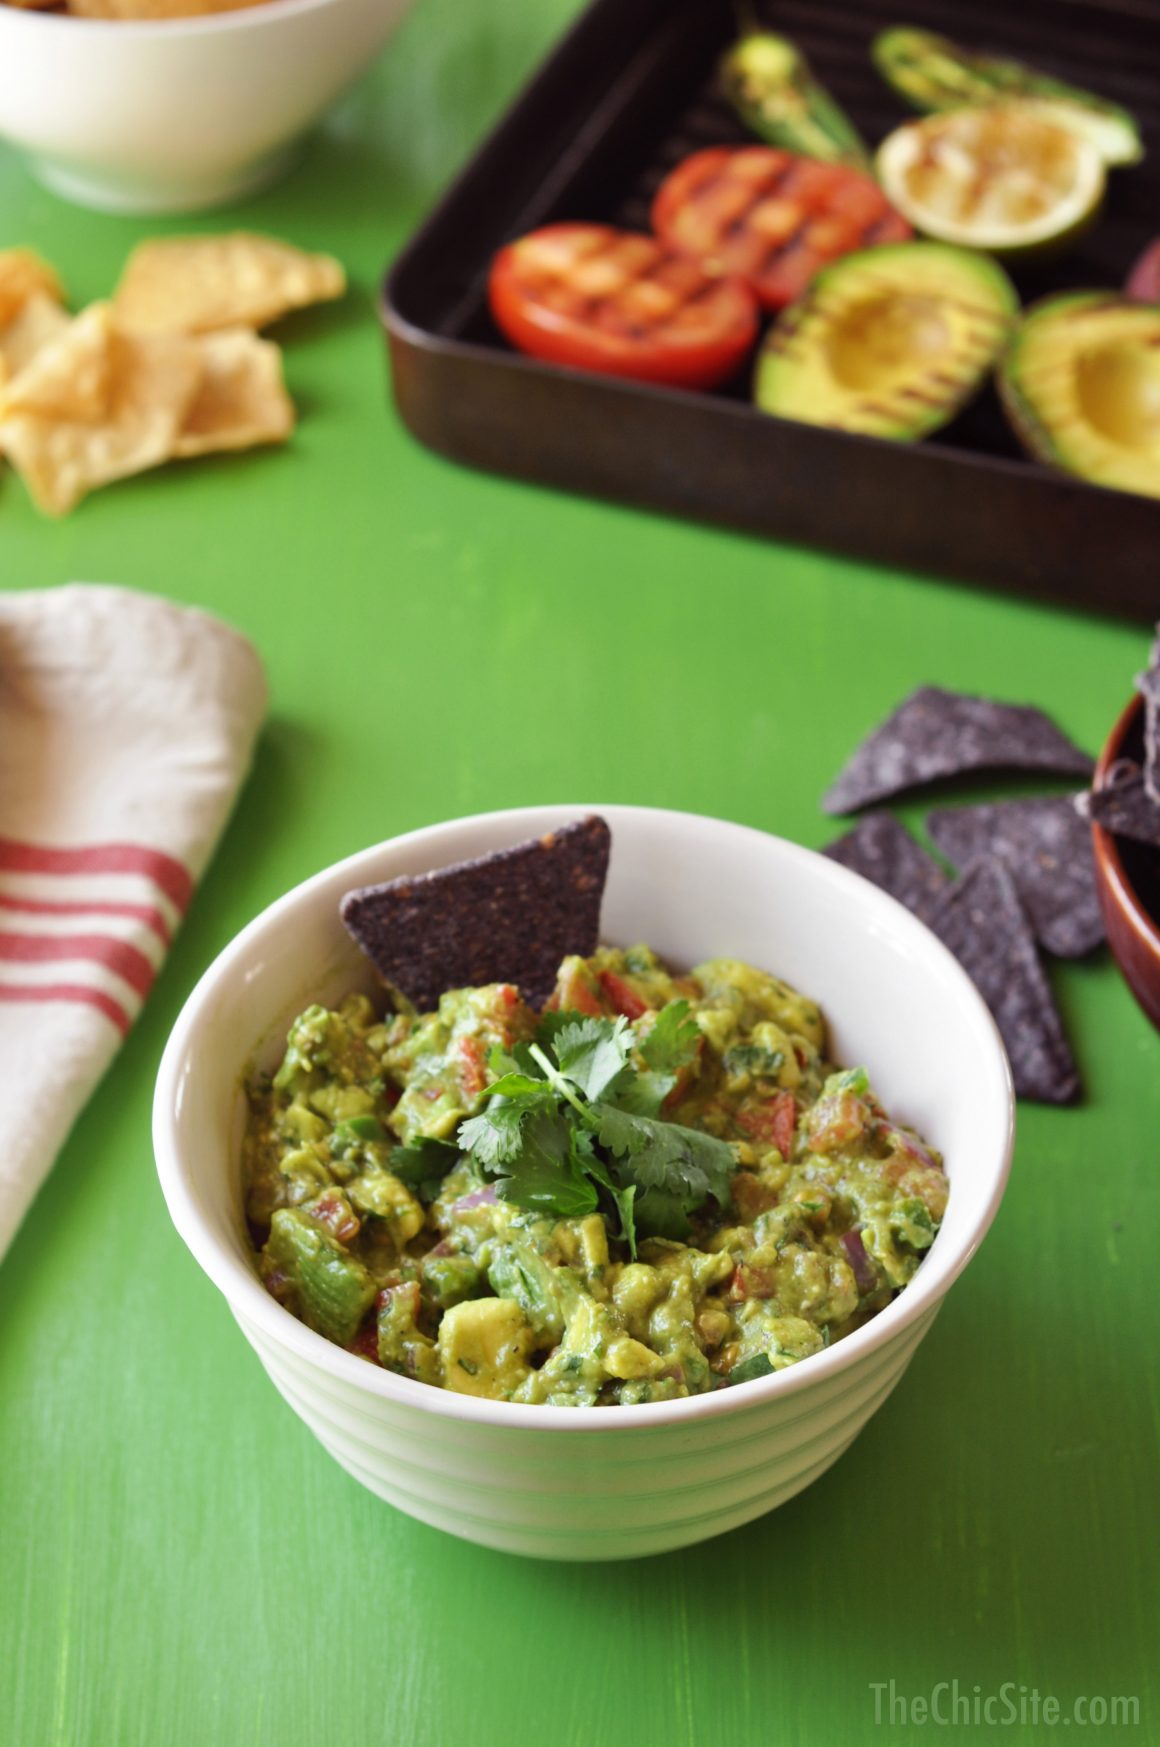 Grilled Guacamole Recipe from The Chic Site